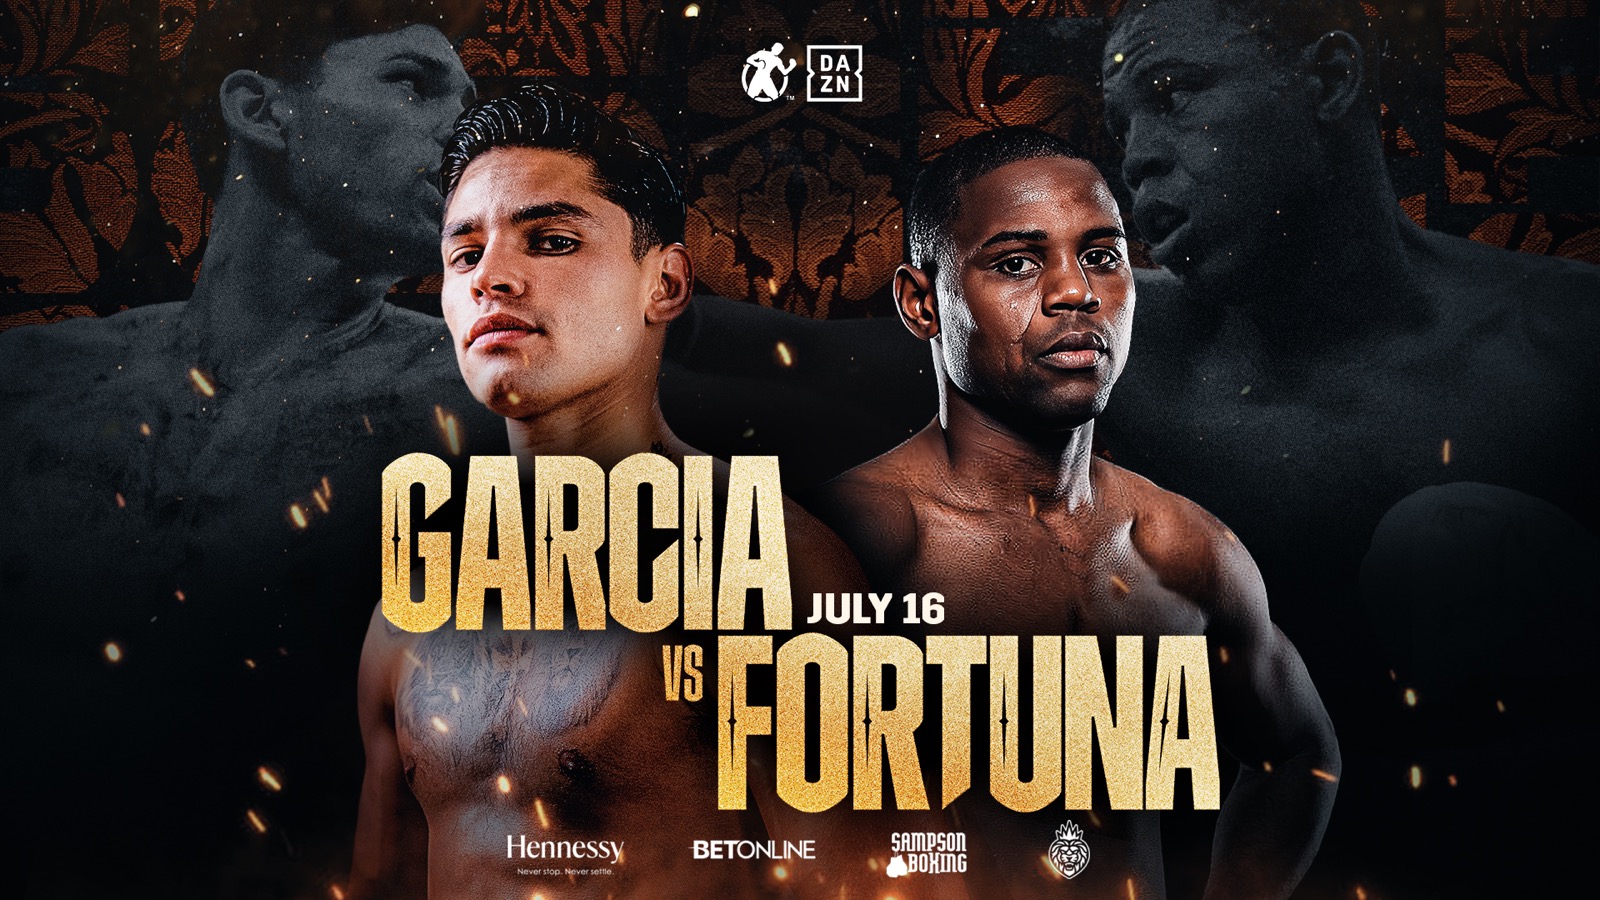 Image: Ryan Garcia's dad predicts early knockout of Javier Fortuna on July 16th